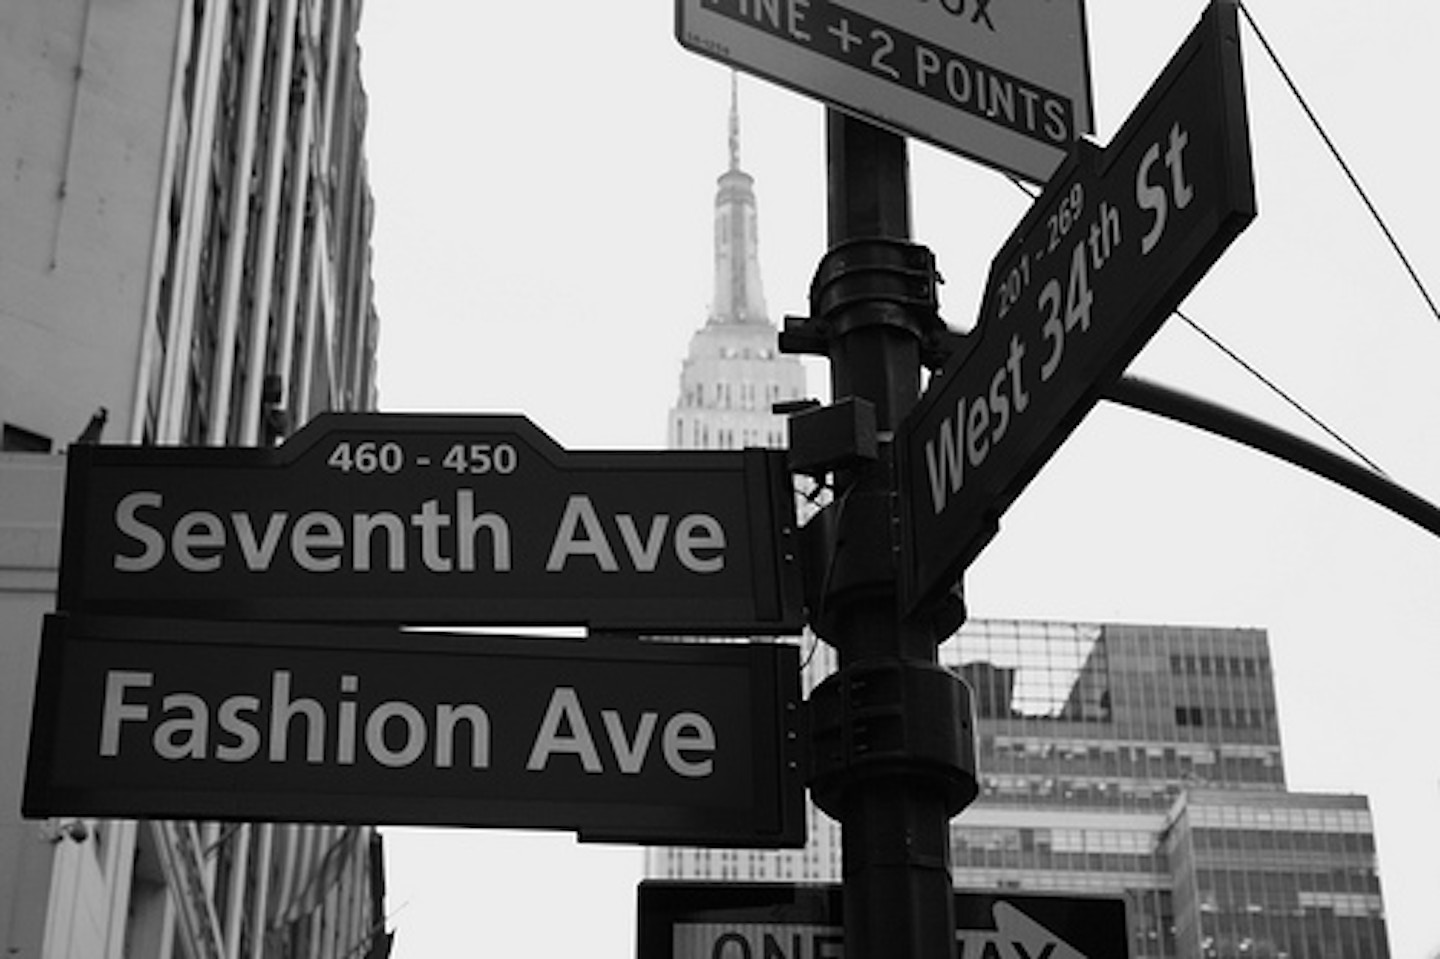 New York Fashion Week – Please help me get there.